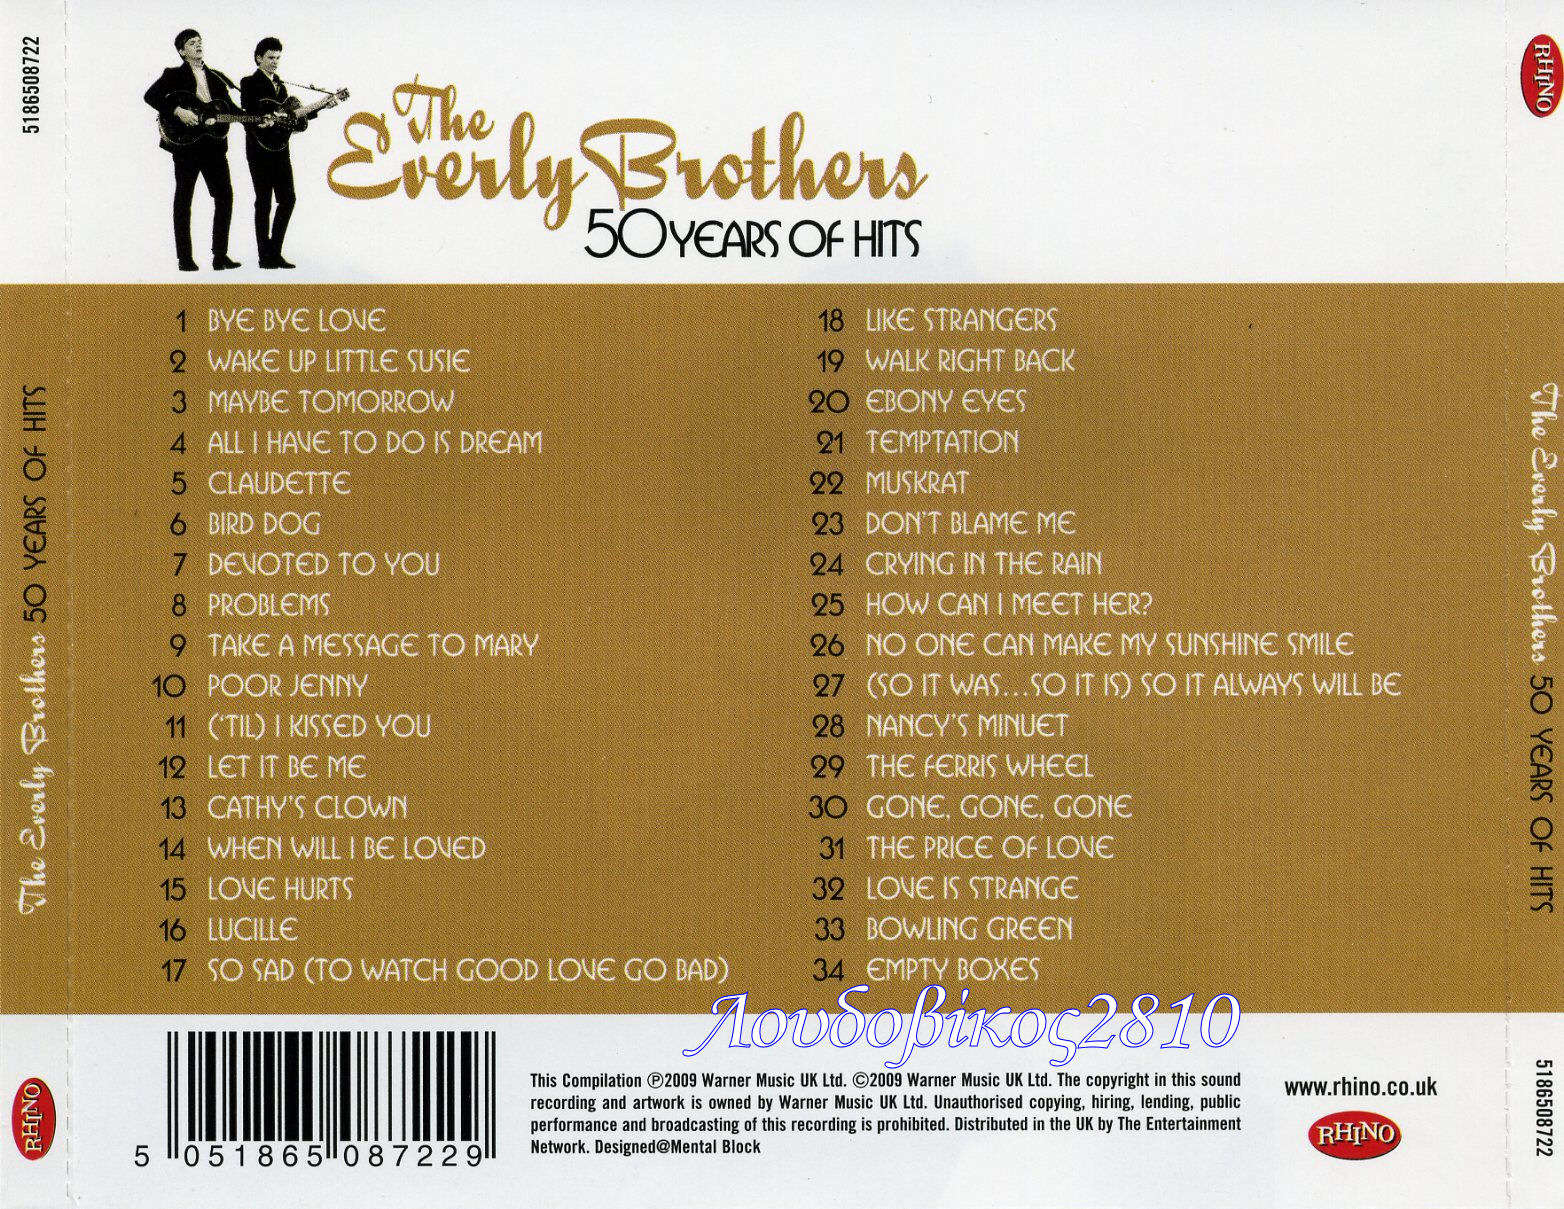 Everly brothers – 50 years of Hits. The Everly brothers all i have to do is Dream 50 years of Hits. 50 And 50 brothers 80. The Everly brothers all i have to do is Dream 50 years.